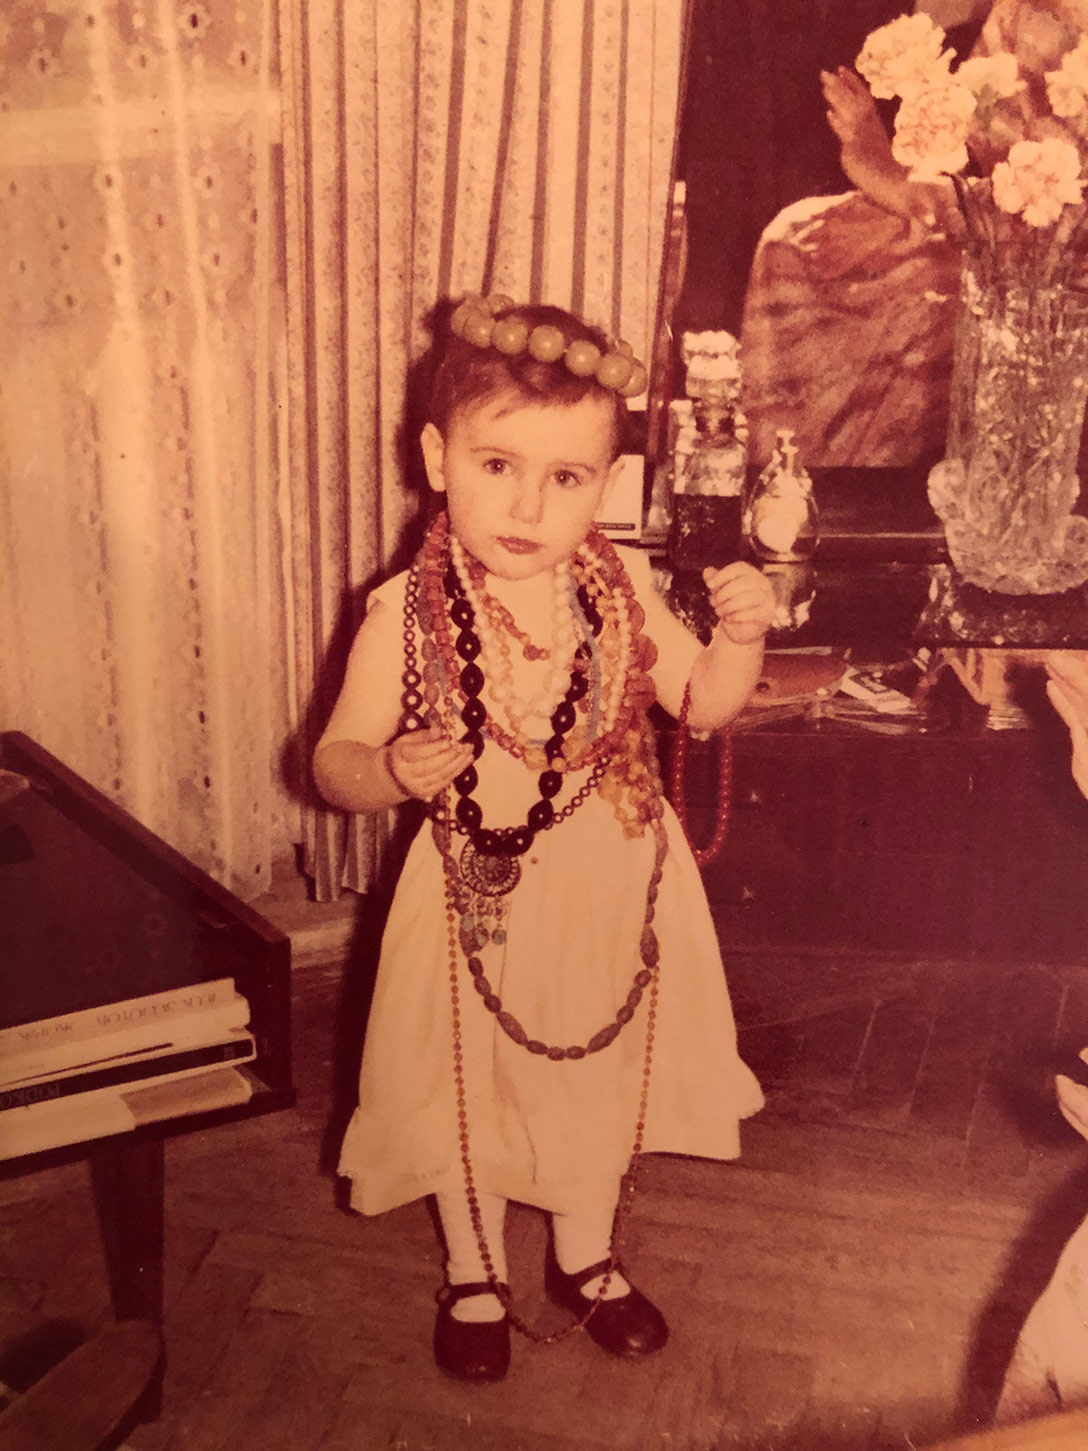 Katerina Perez at 2 years old wearing grandmother's jewellery